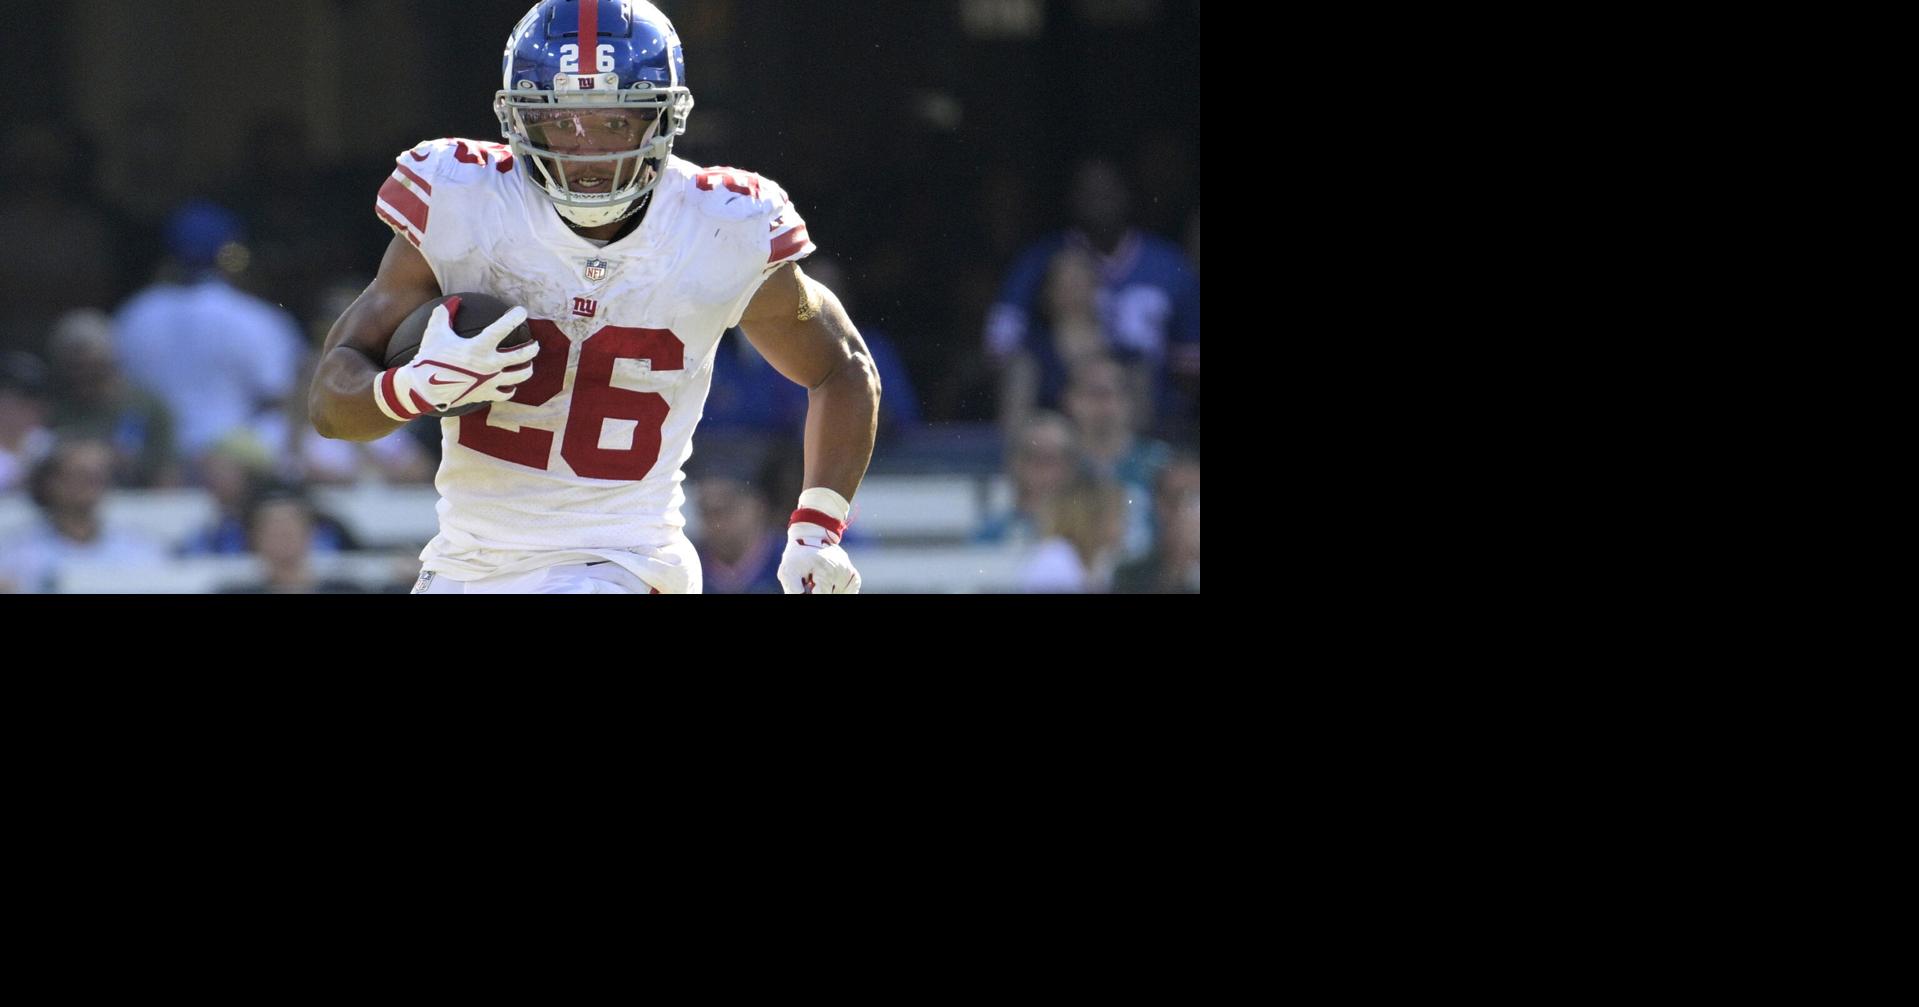 Best Sportsbook Promos for Cowboys vs. Giants on Sunday Night Football